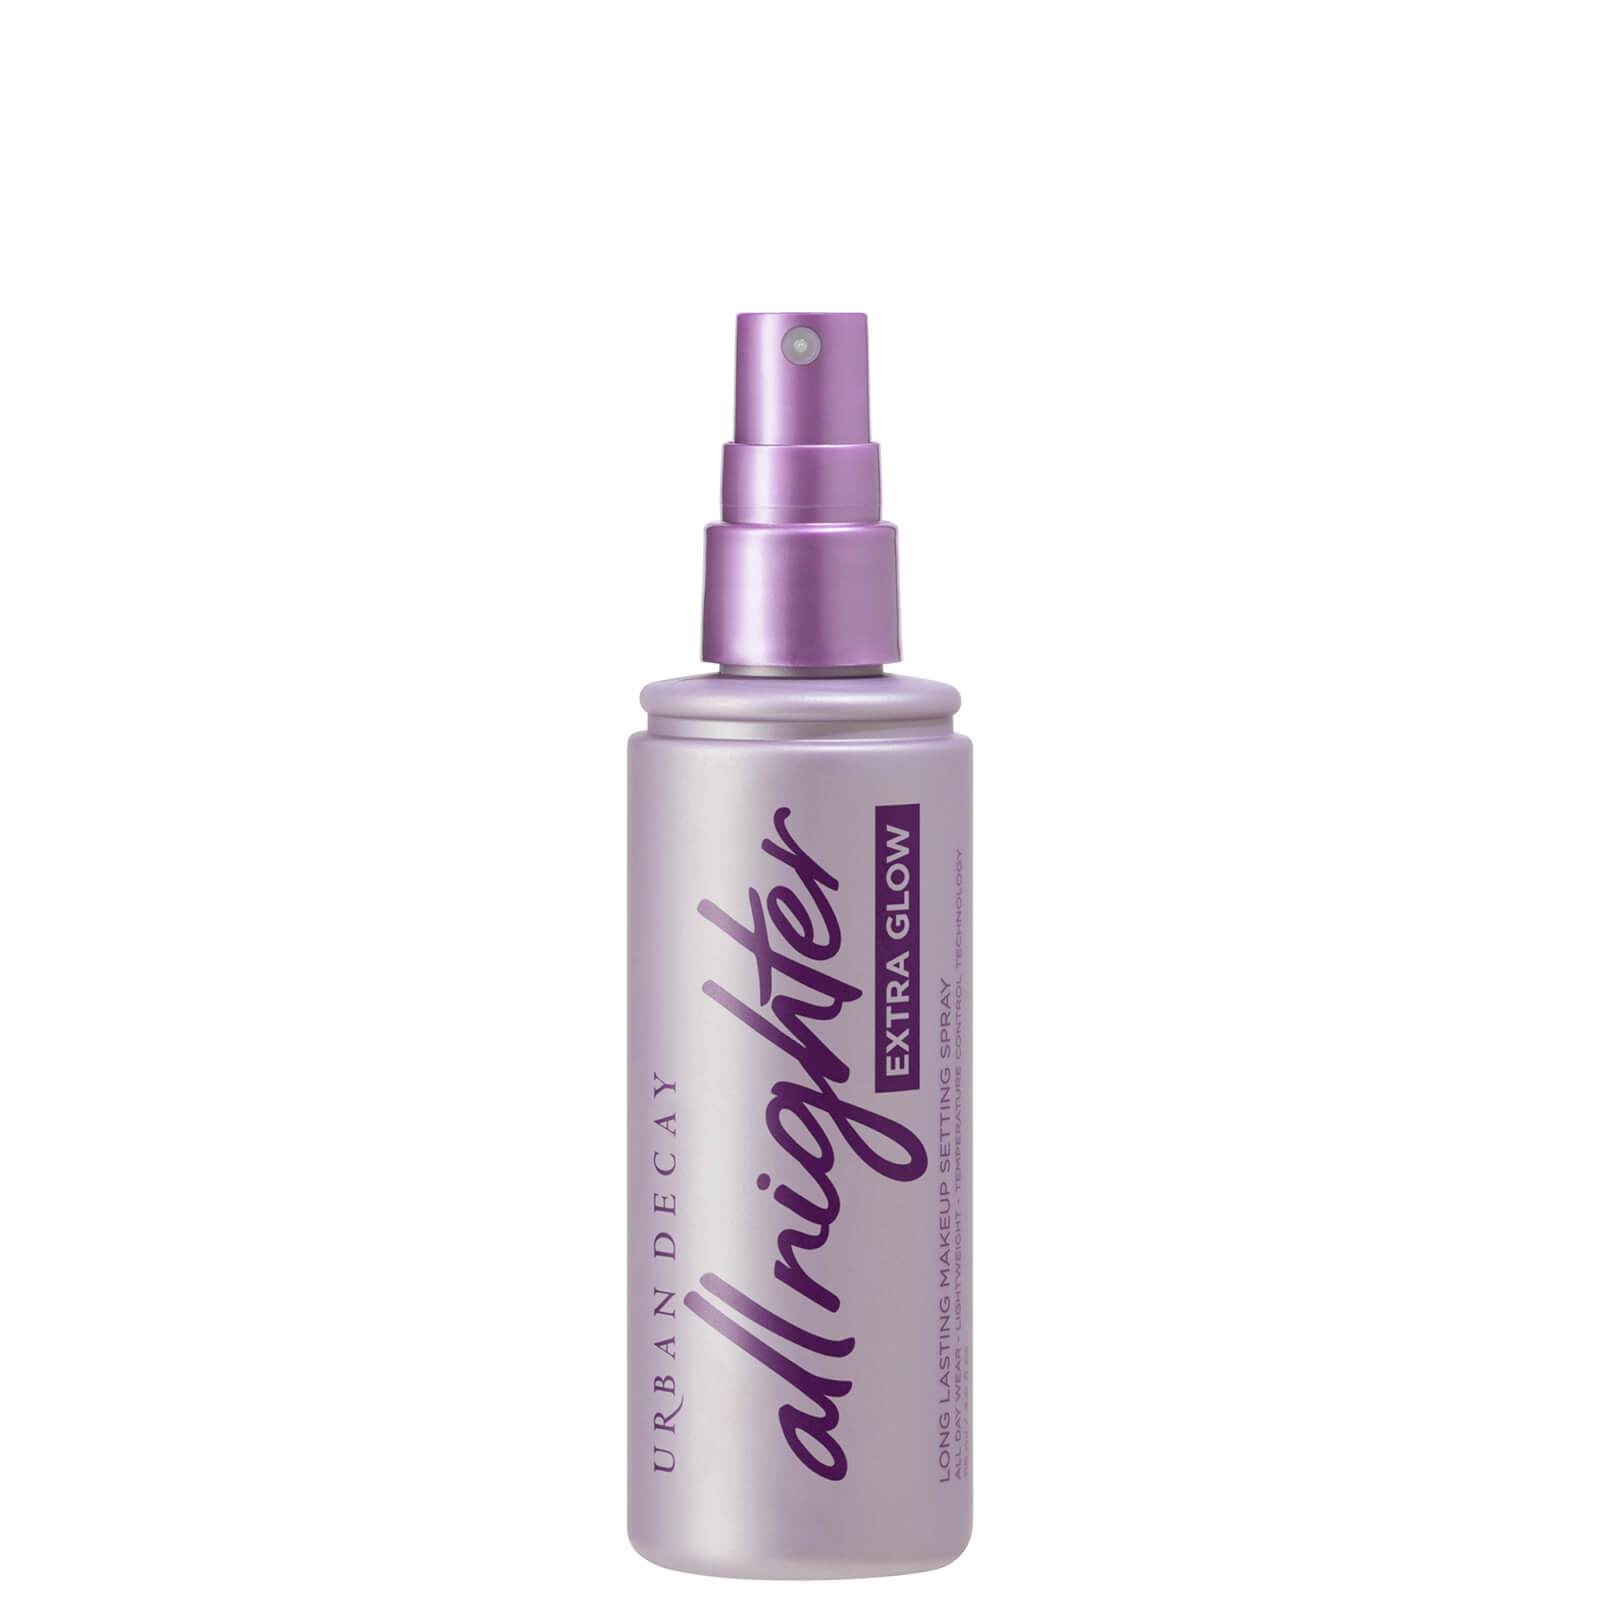 Image of Urban Decay All Nighter Setting Spray Extra Glow